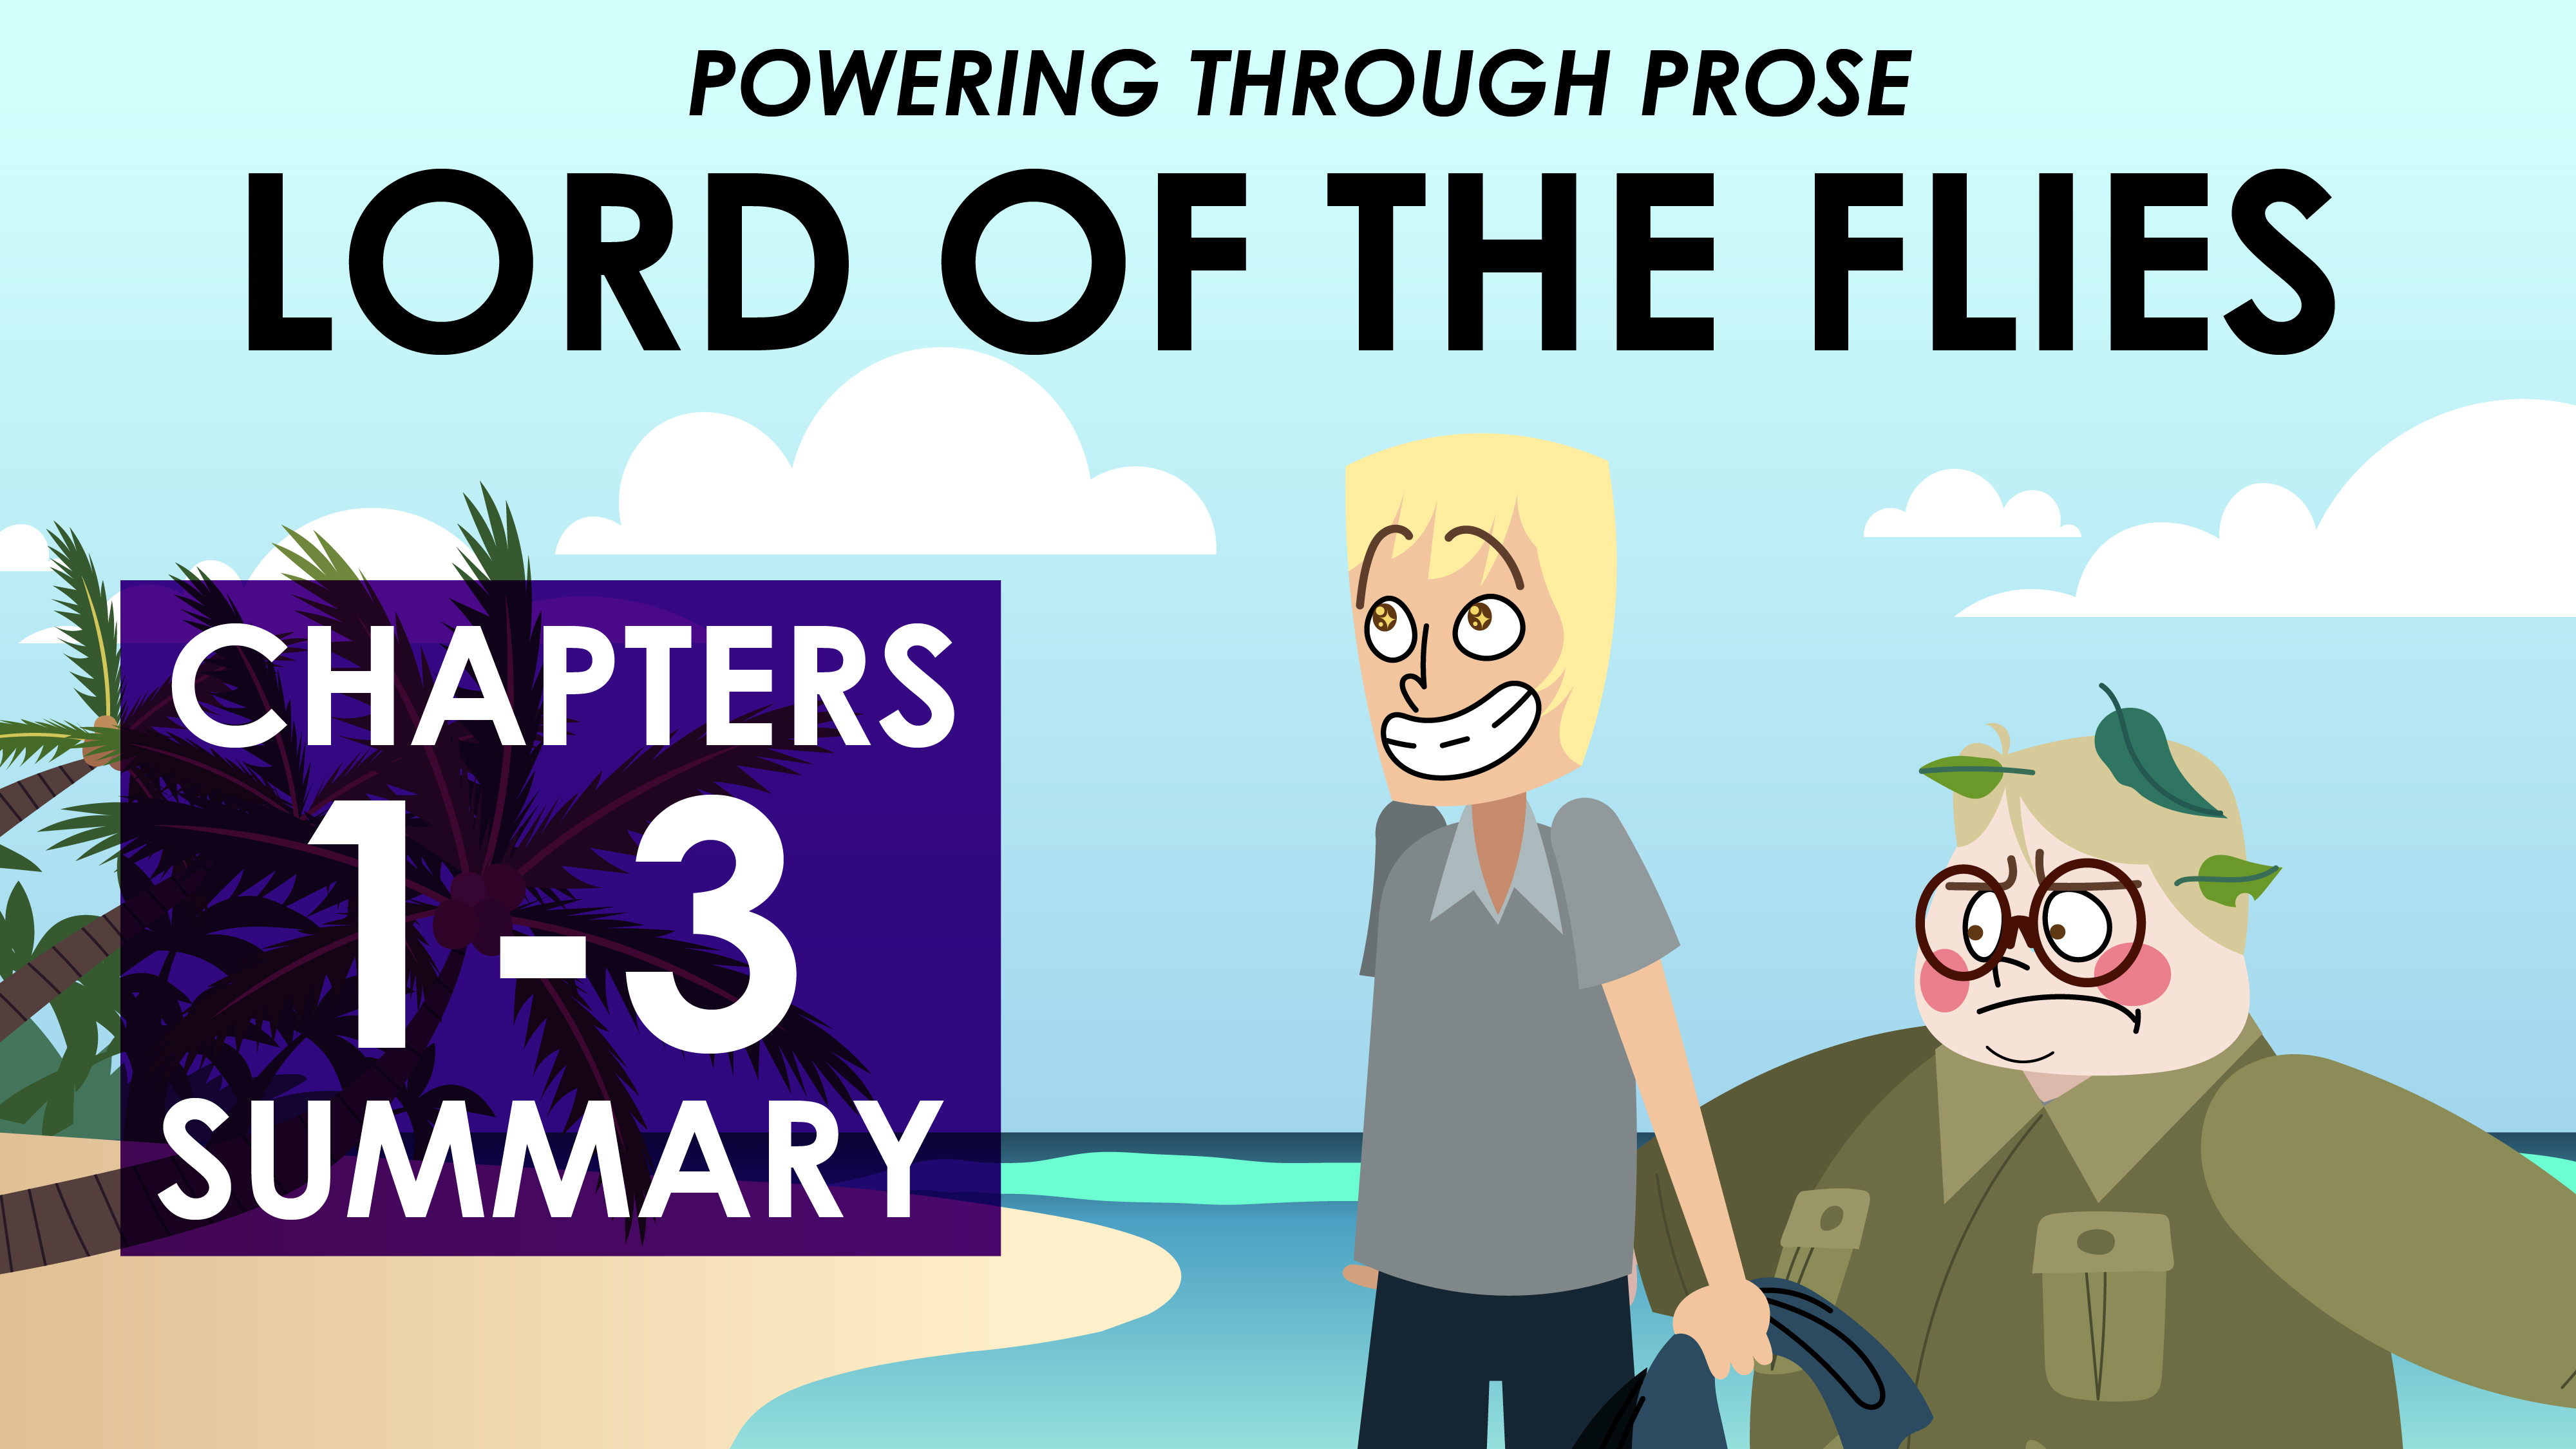 Lord of the Flies - William Golding - Chapters 1-3 Summary - Powering Through Prose Series